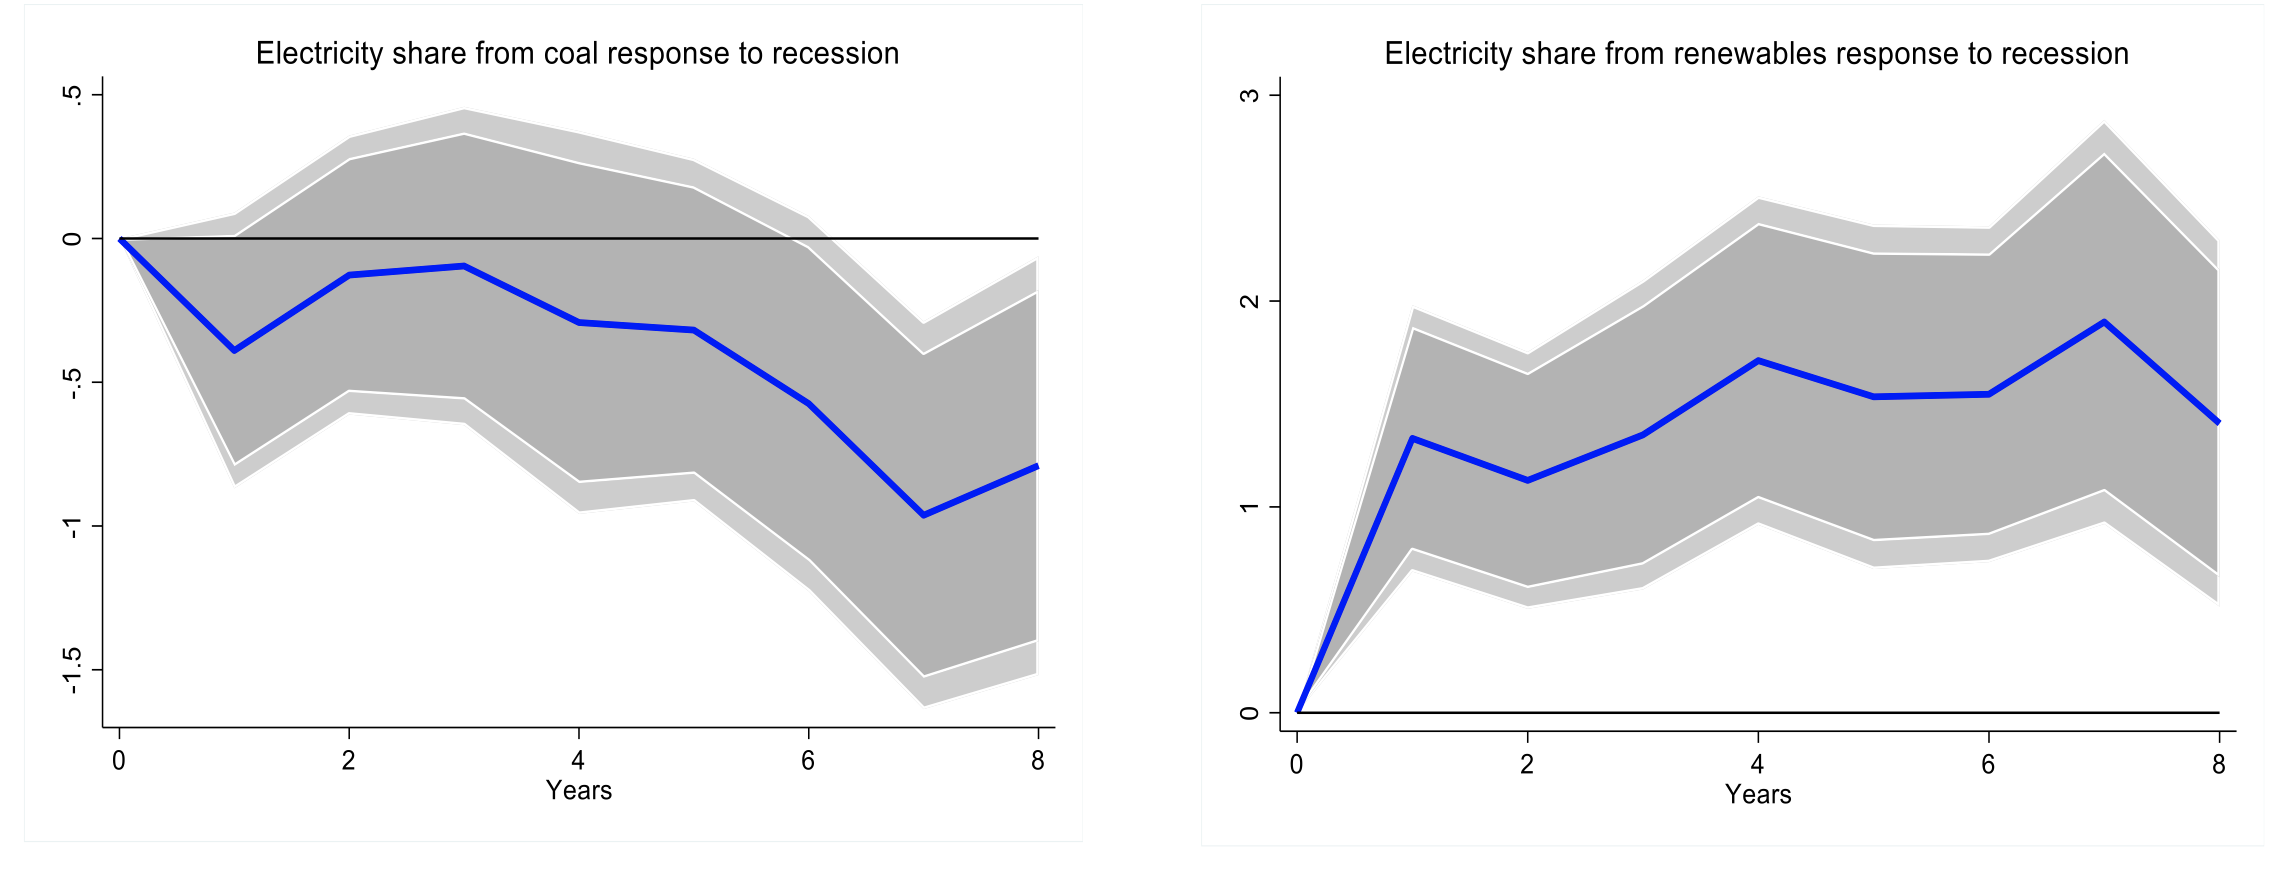 Recessions, creative destruction, and the shift to a greener energy mix 2